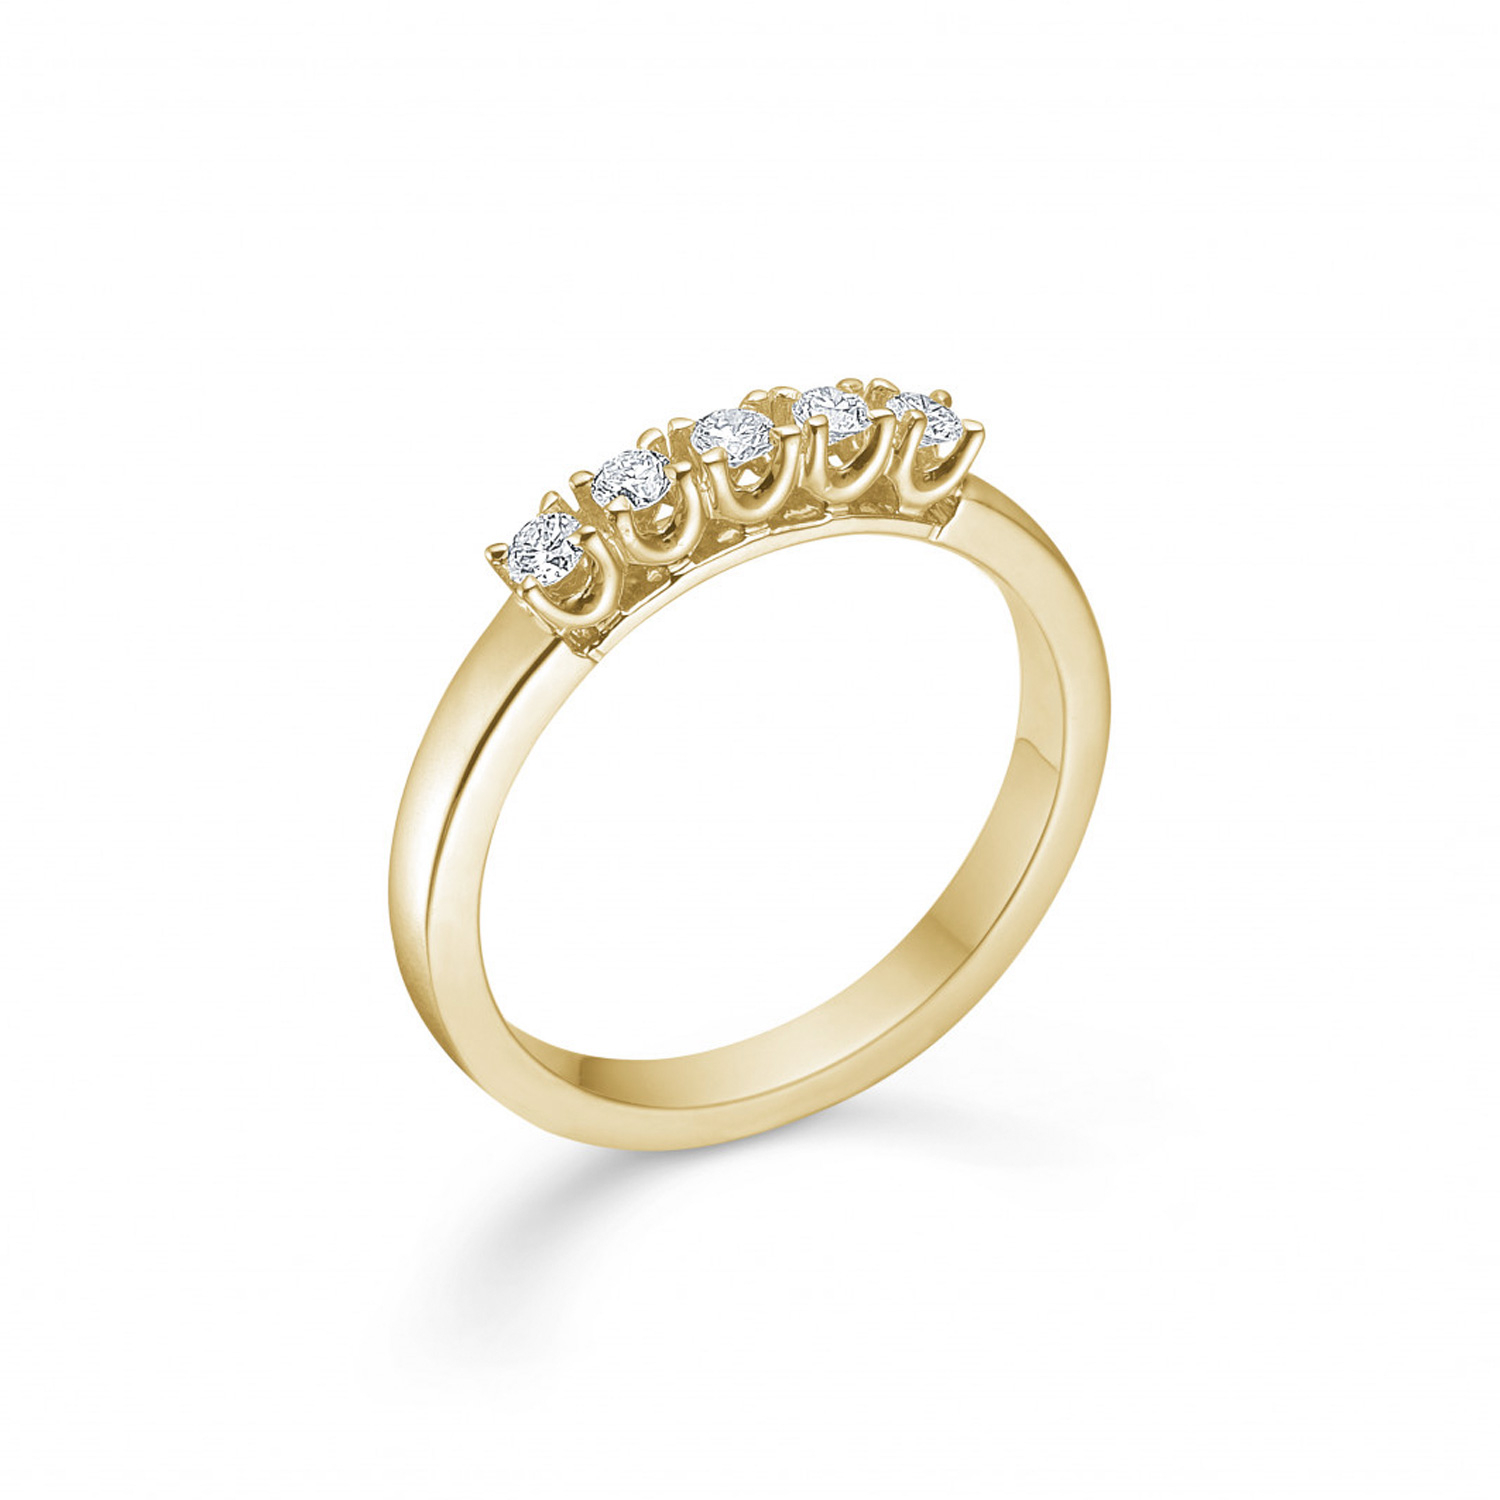 Mads Z Crown Alliance Ring 14 kt. Guld 0,04 ct. 1541845-52 - Woman - Gold thumbnail